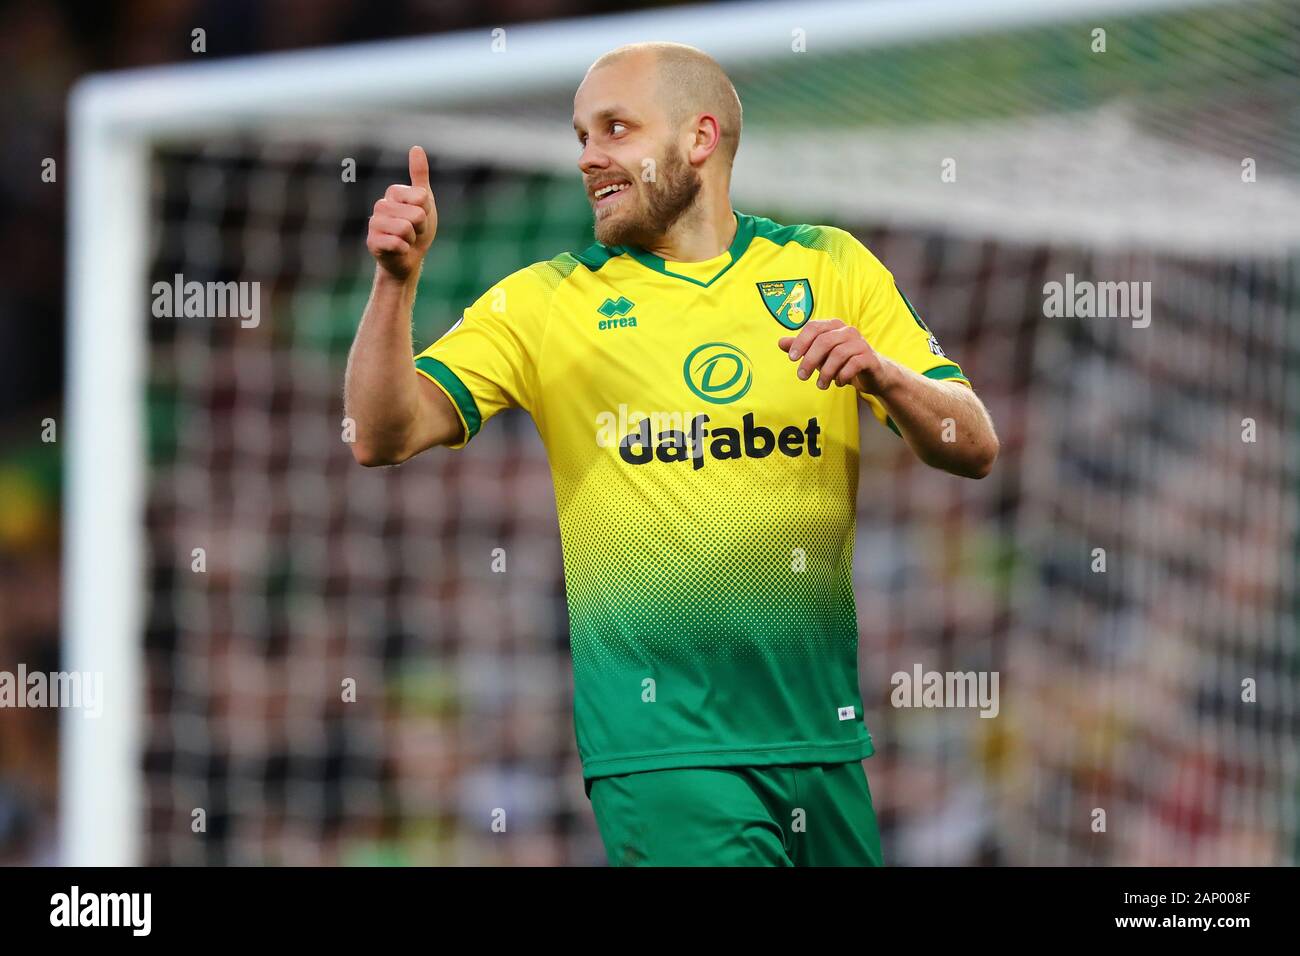 Teemu Pukki Of Norwich City Norwich City V Afc Bournemouth Premier League Carrow Road Norwich Uk 18th January 2020 Editorial Use Only Dataco Restrictions Apply Stock Photo Alamy